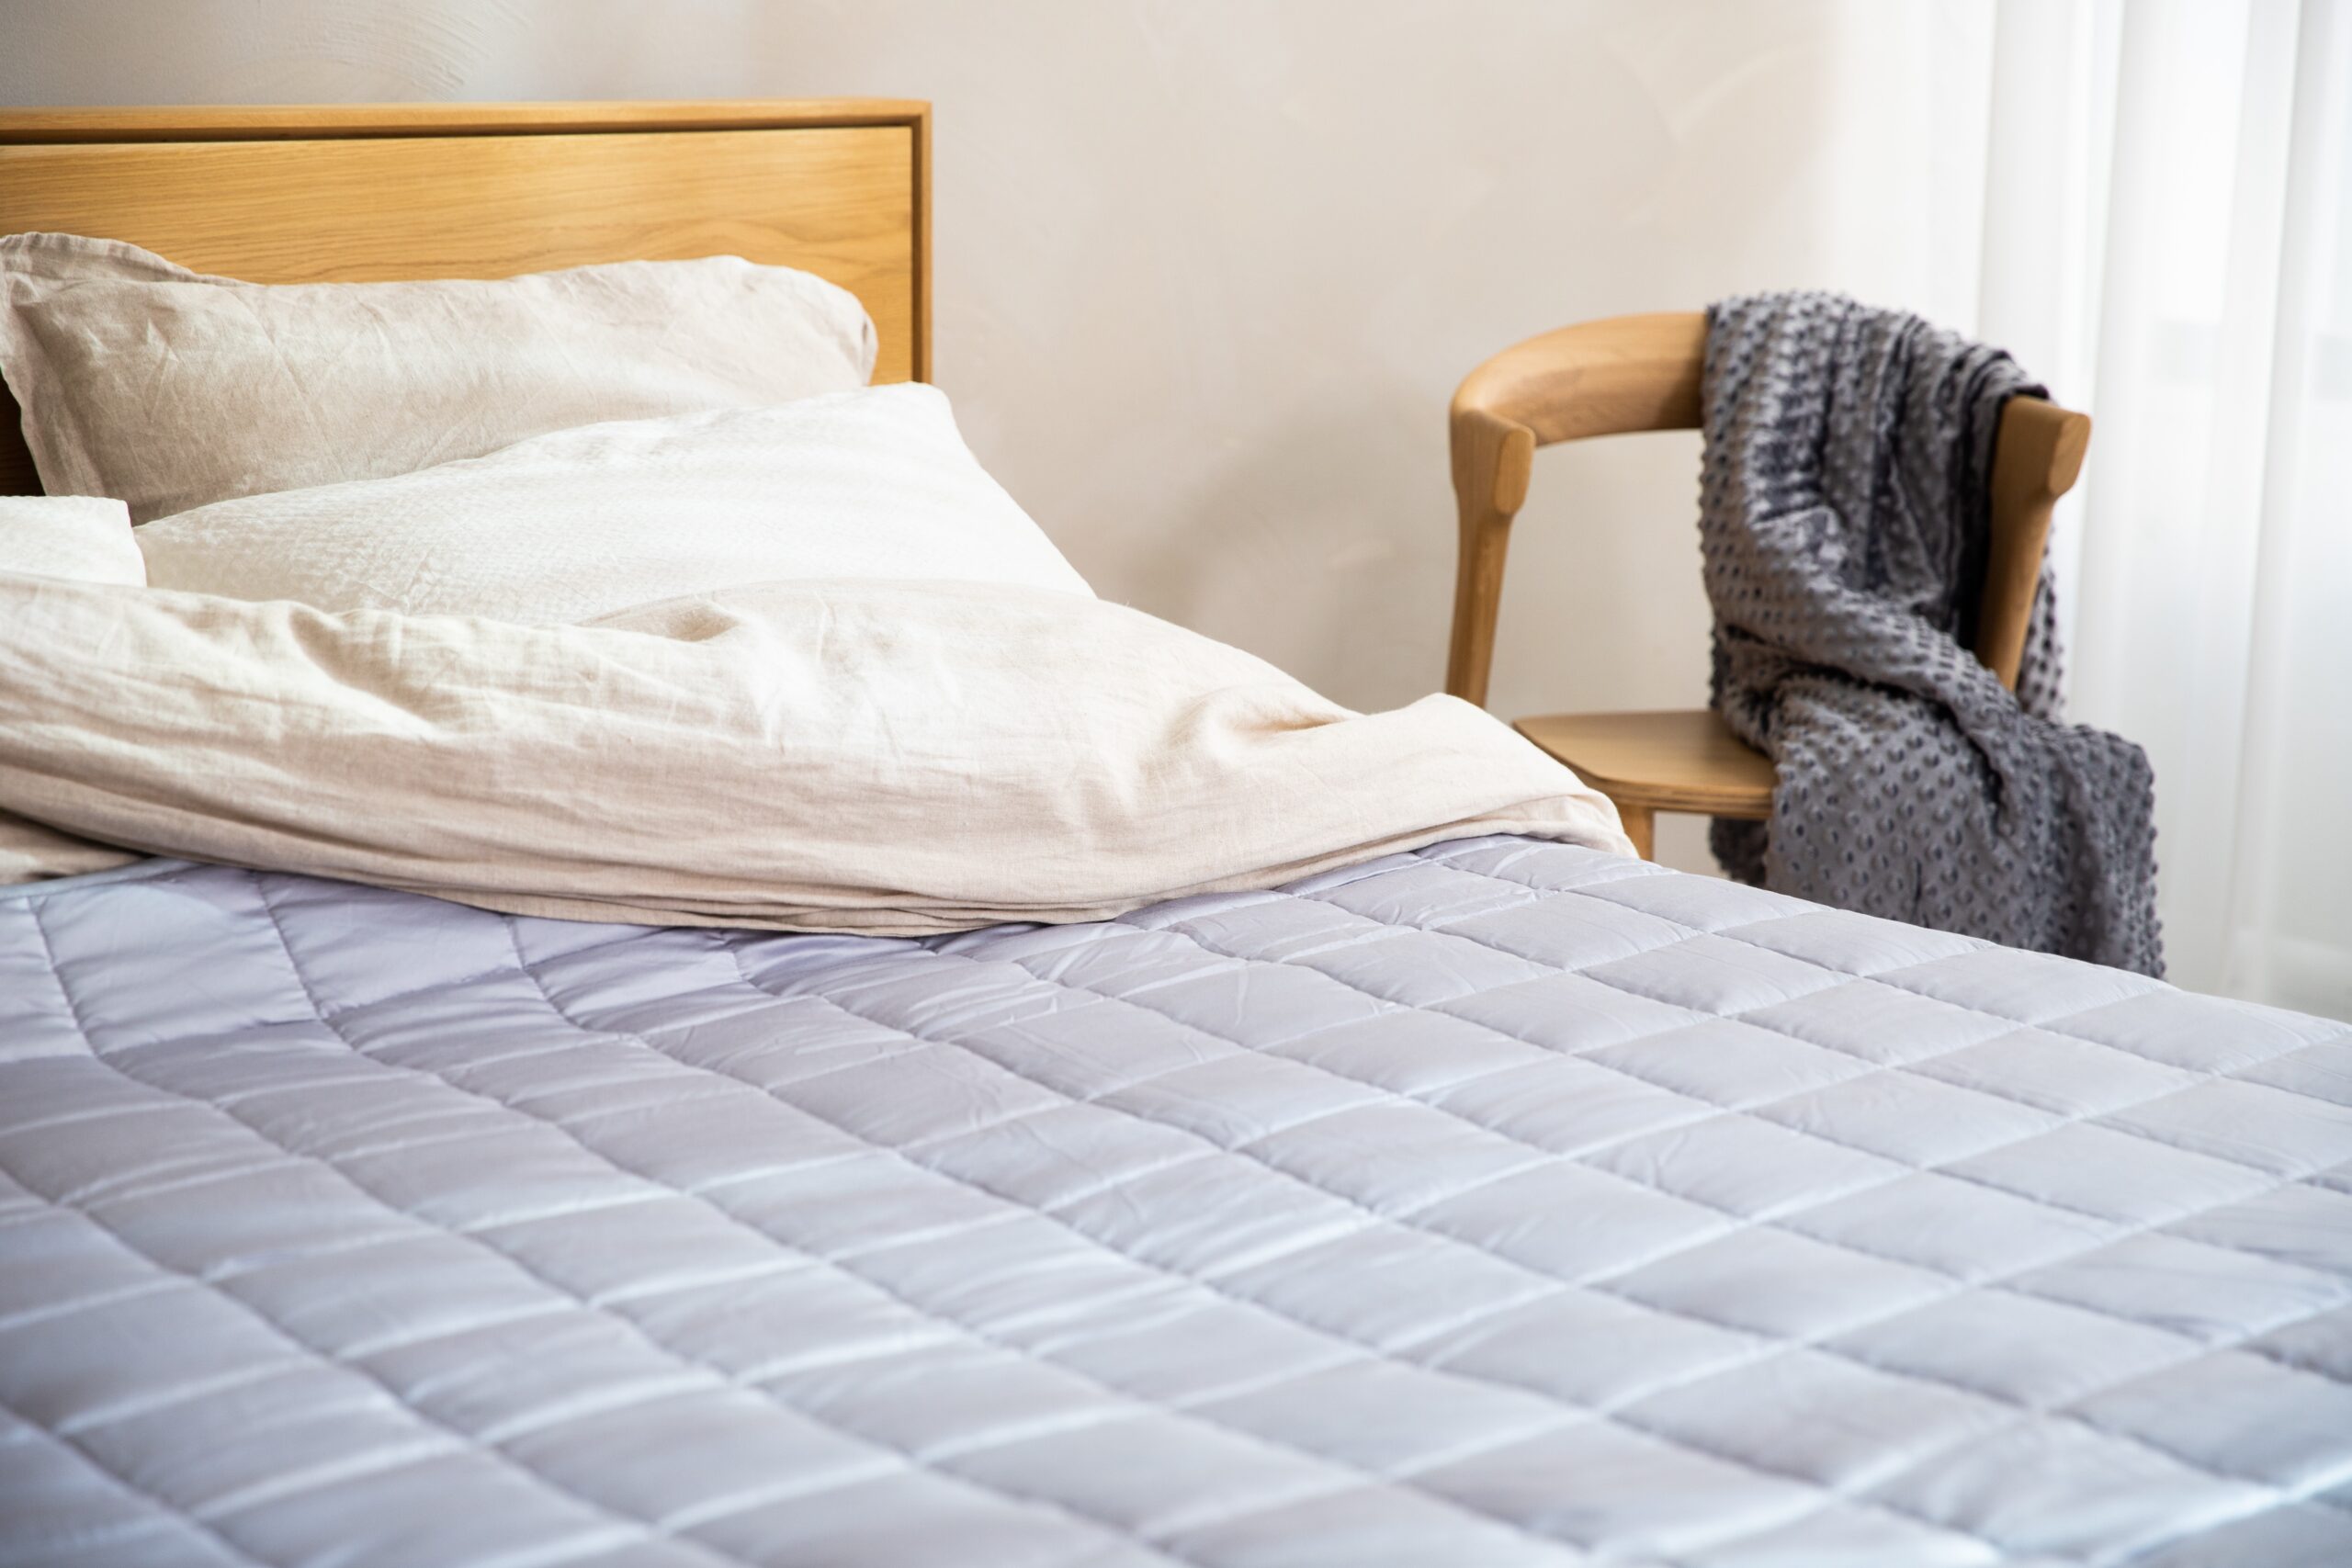 All You Need to Know Before Buying a Mattress